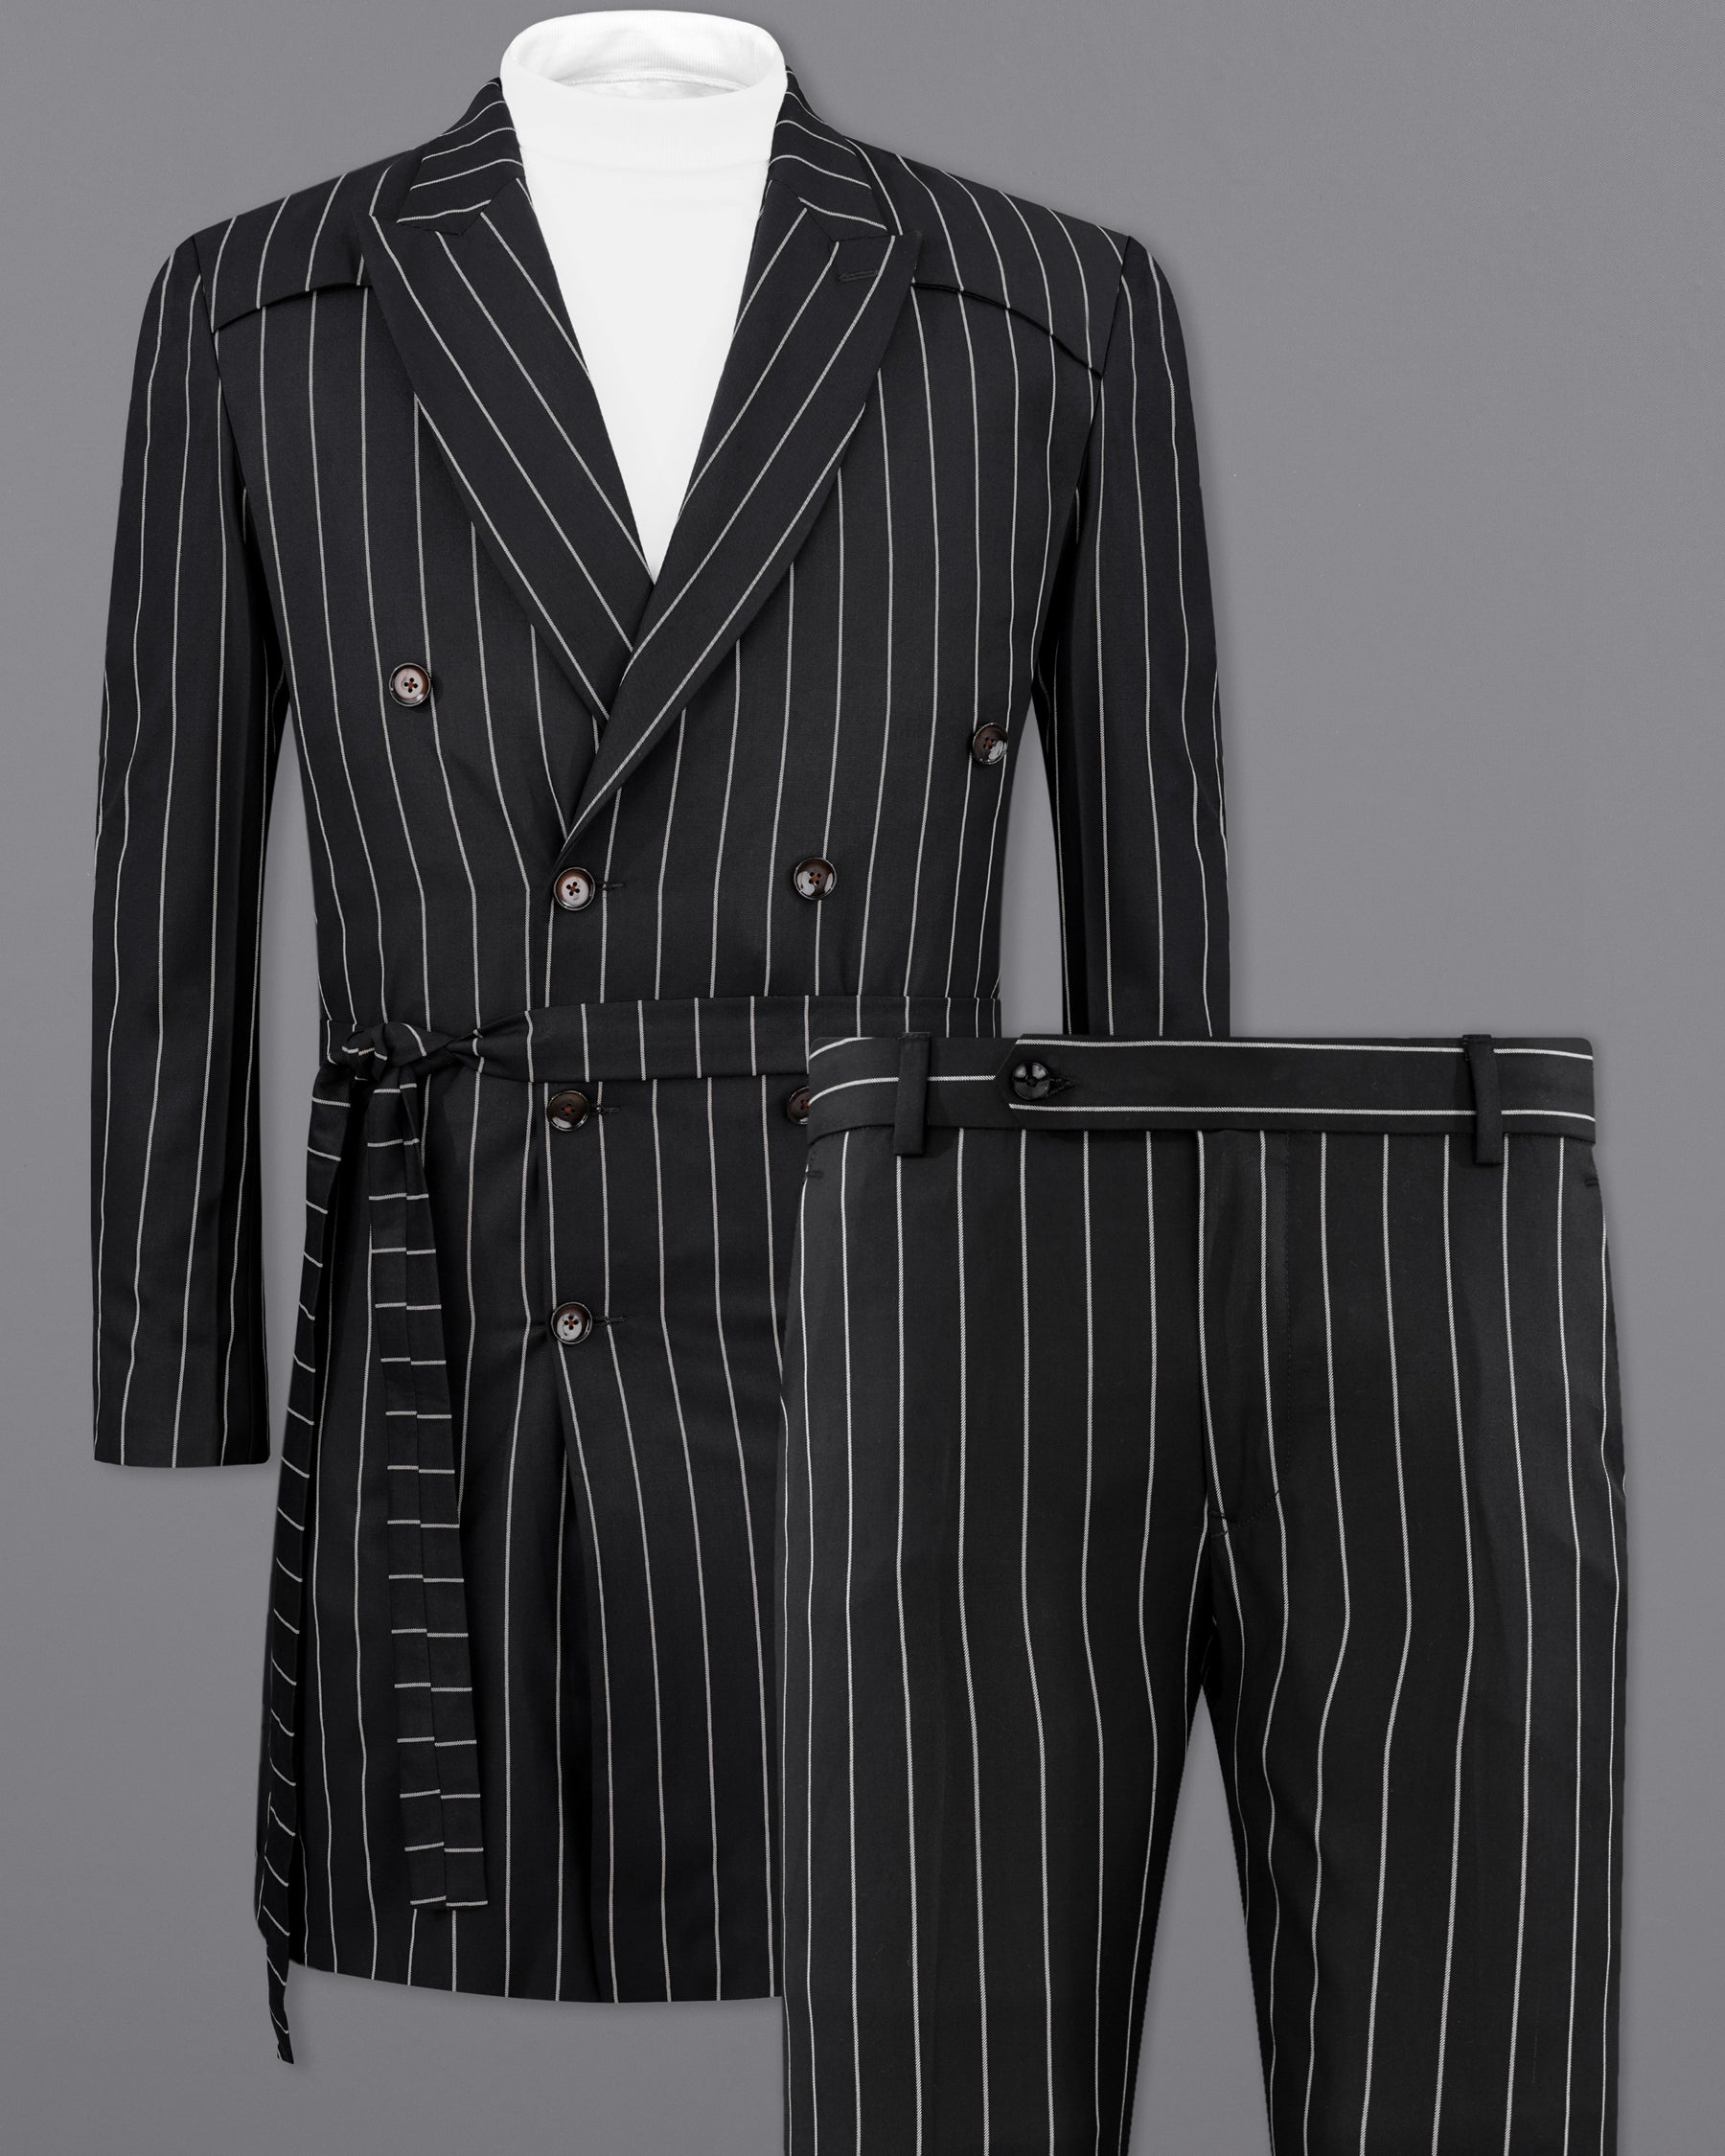 Jaguar Black with Concrete Gray Striped Double Breasted Trench Coat Belt Closure with Pant TCPT2157-DB-D35-36, TCPT2157-DB-D35-38, TCPT2157-DB-D35-40, TCPT2157-DB-D35-42, TCPT2157-DB-D35-44, TCPT2157-DB-D35-46, TCPT2157-DB-D35-48, TCPT2157-DB-D35-50, TCPT2157-DB-D35-52, TCPT2157-DB-D35-54, TCPT2157-DB-D35-56, TCPT2157-DB-D35-58, TCPT2157-DB-D35-60